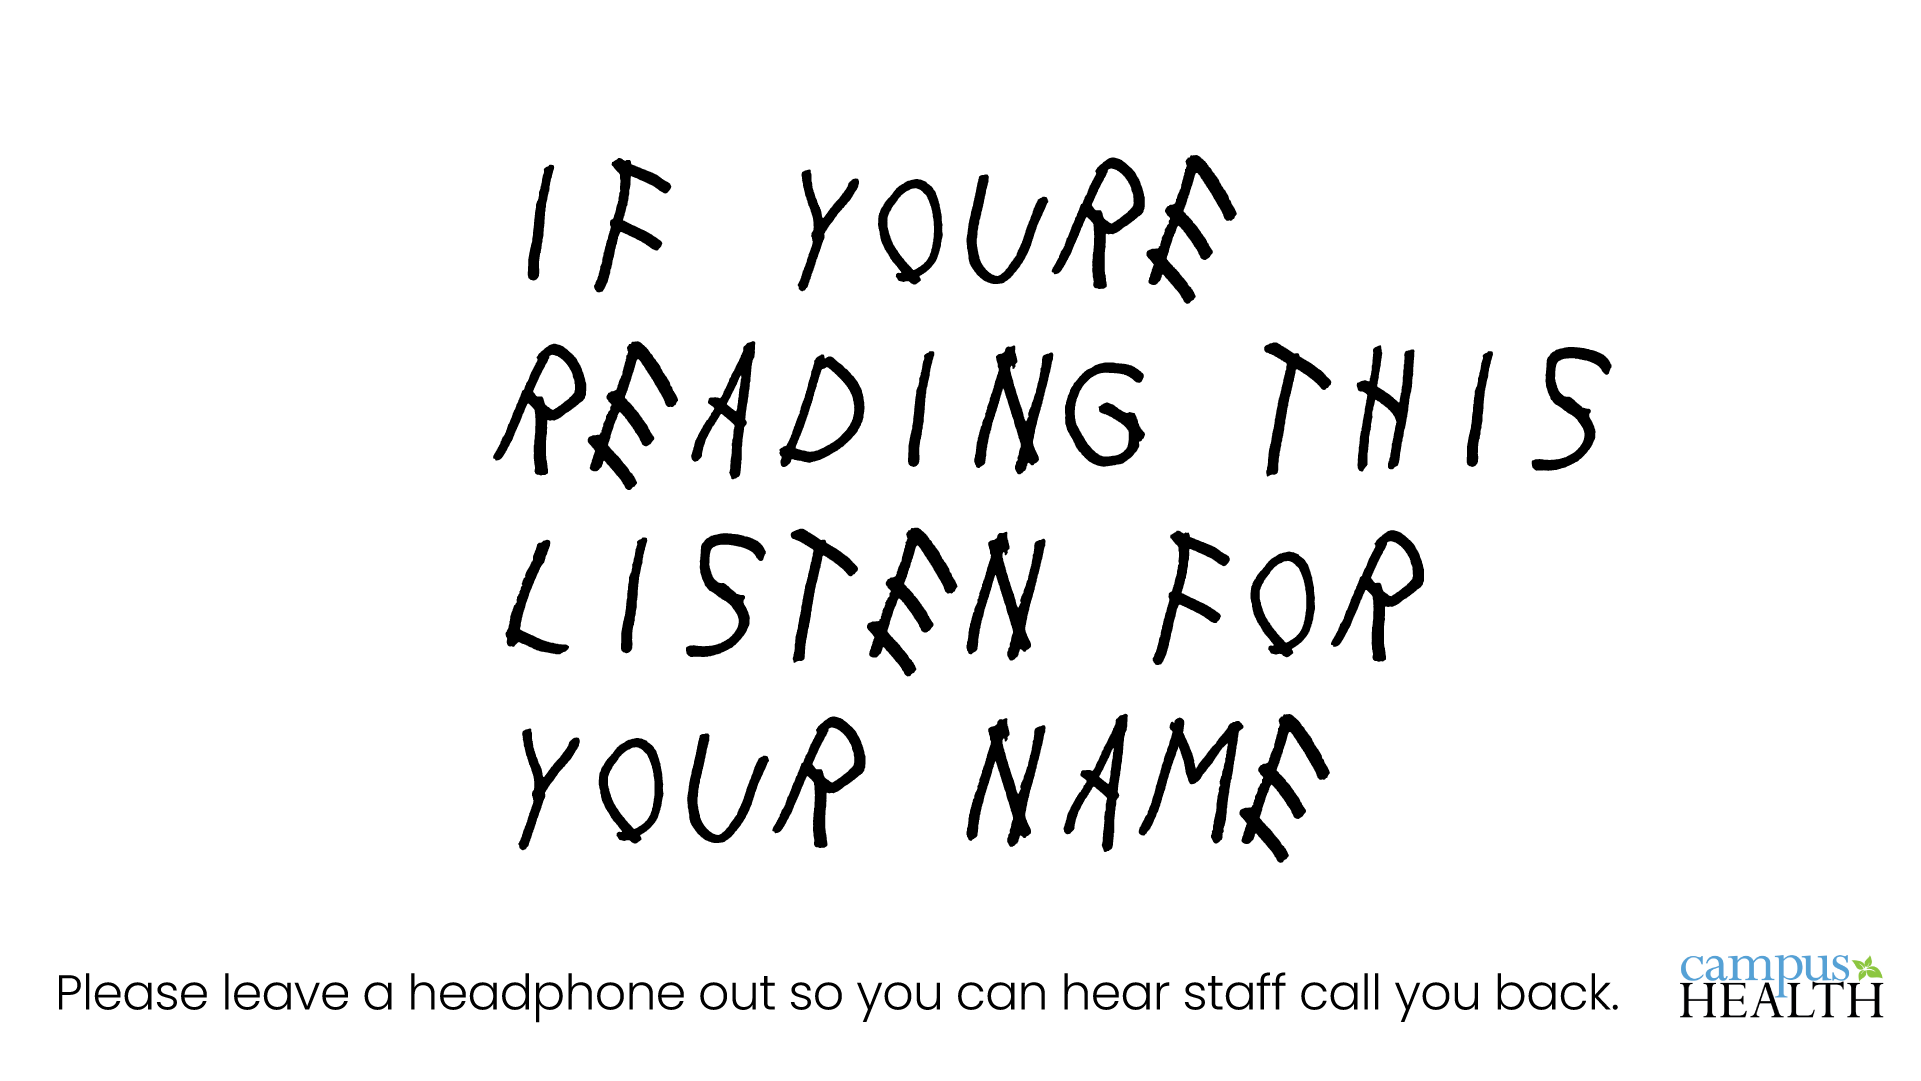 If you're reading this, listen for your name. Please leave a headphone out so you can hear staff call you back.